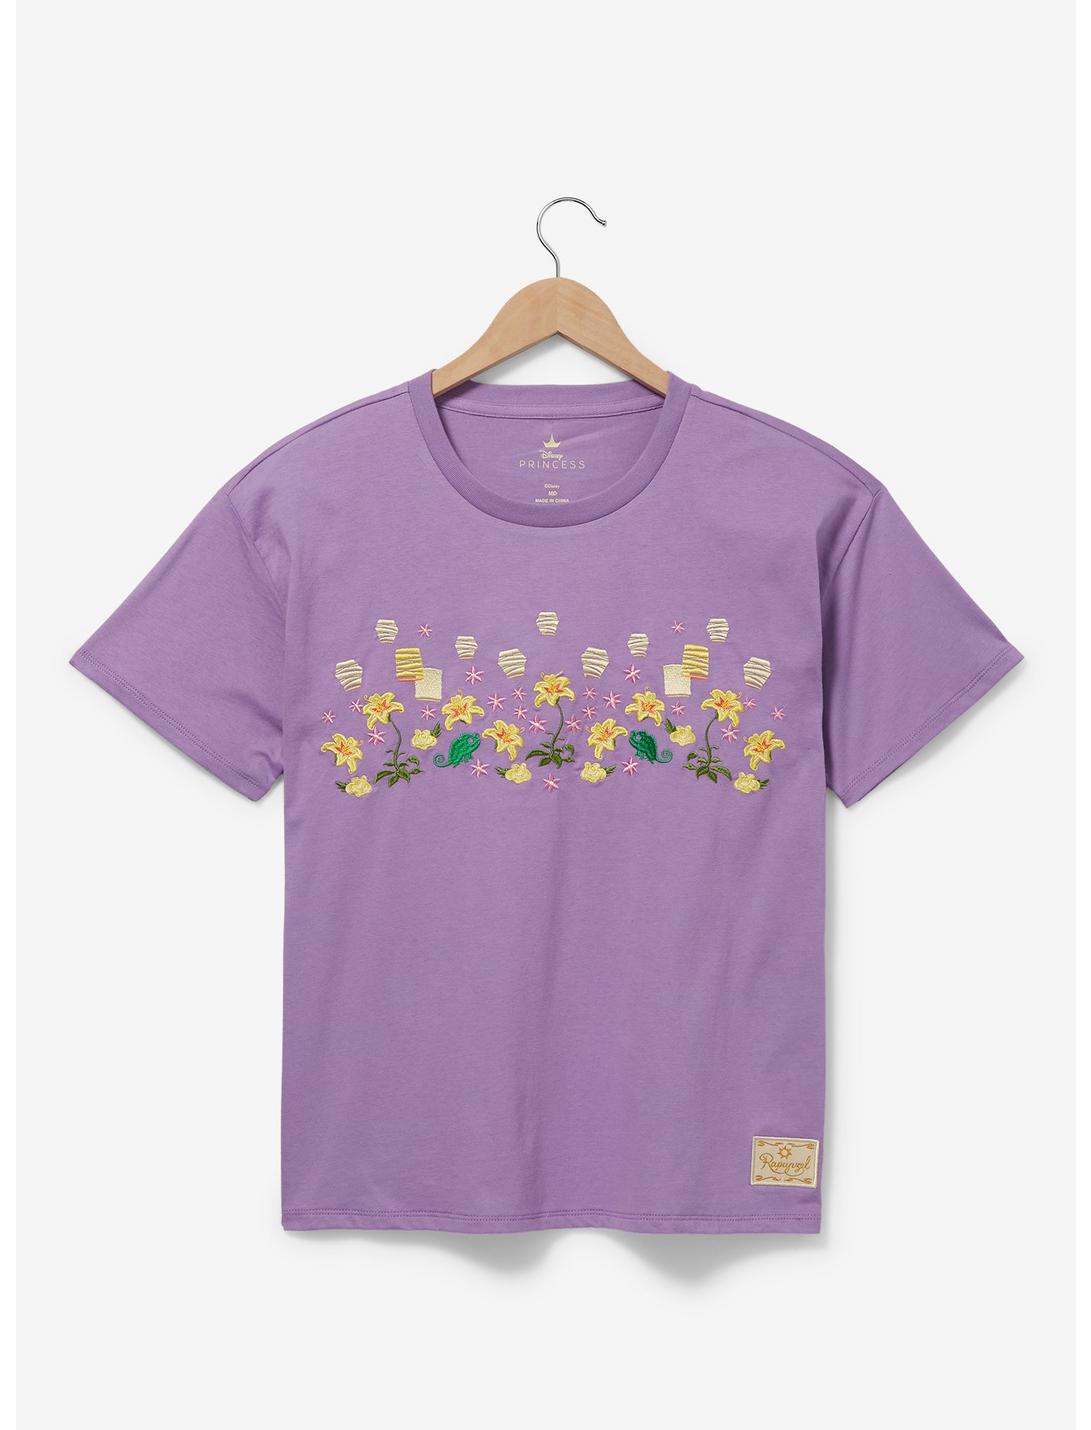 Disney Tangled Floral Lanterns Women's T-Shirt - BoxLunch Exclusive, LILAC, hi-res